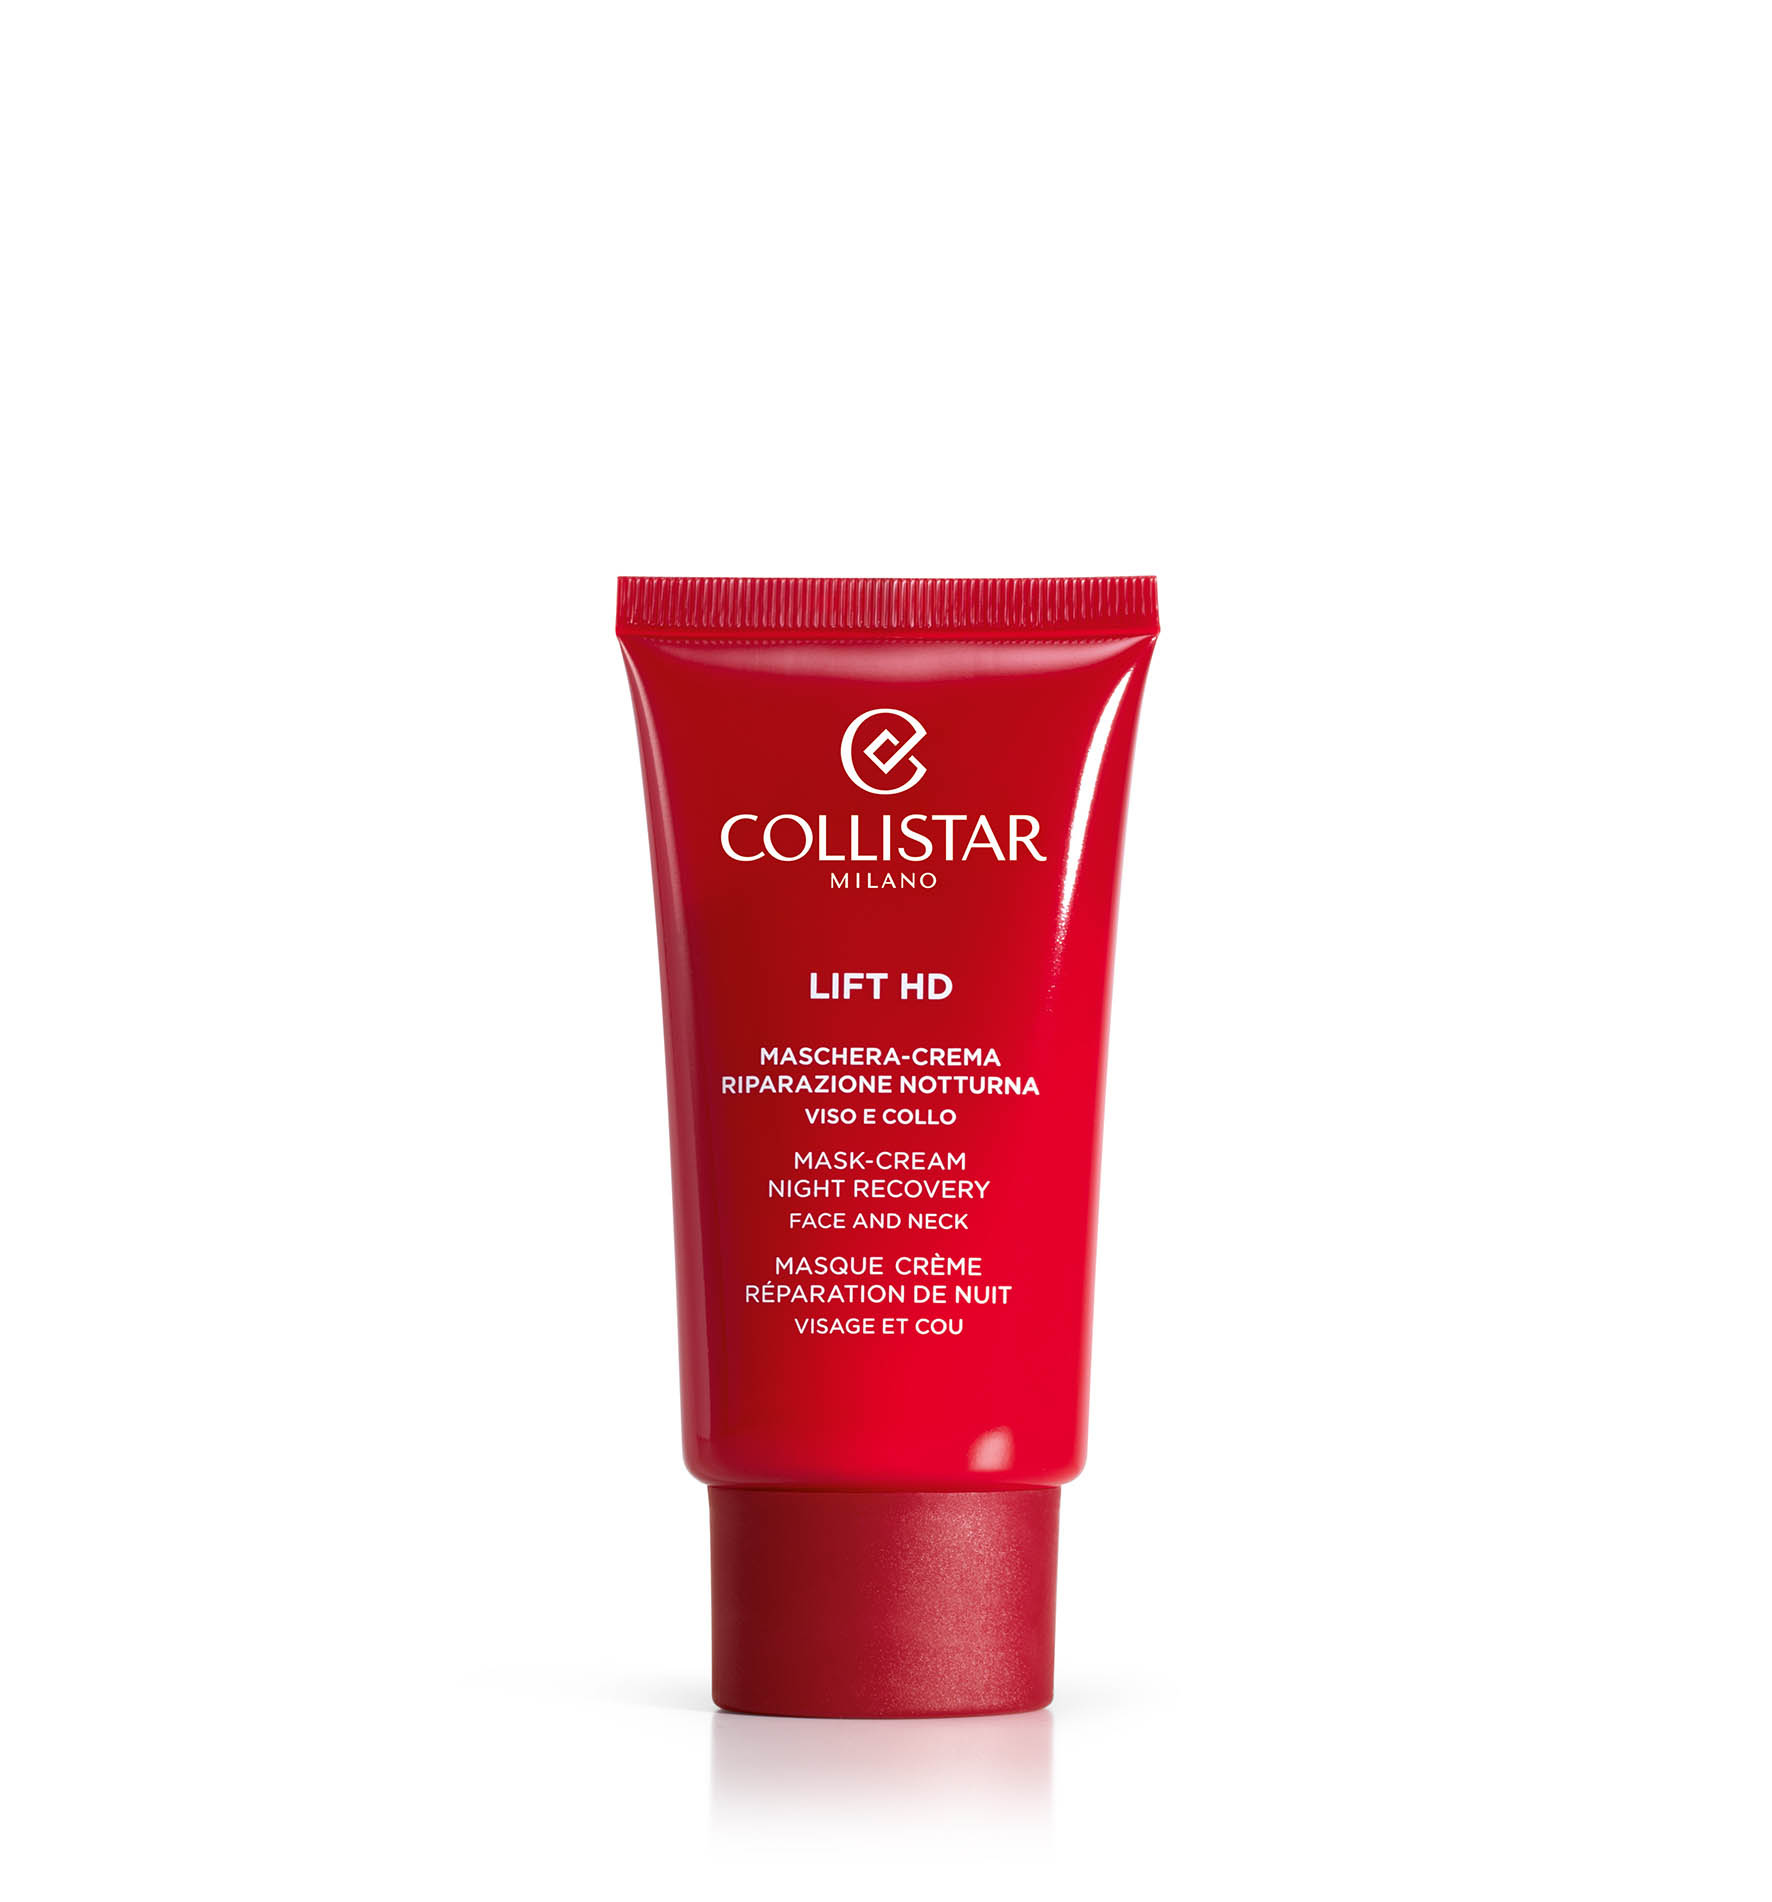 MASK-CREAM NIGHT RECOVERY FACE AND NECK - Lift HD | Collistar - Shop Online Ufficiale